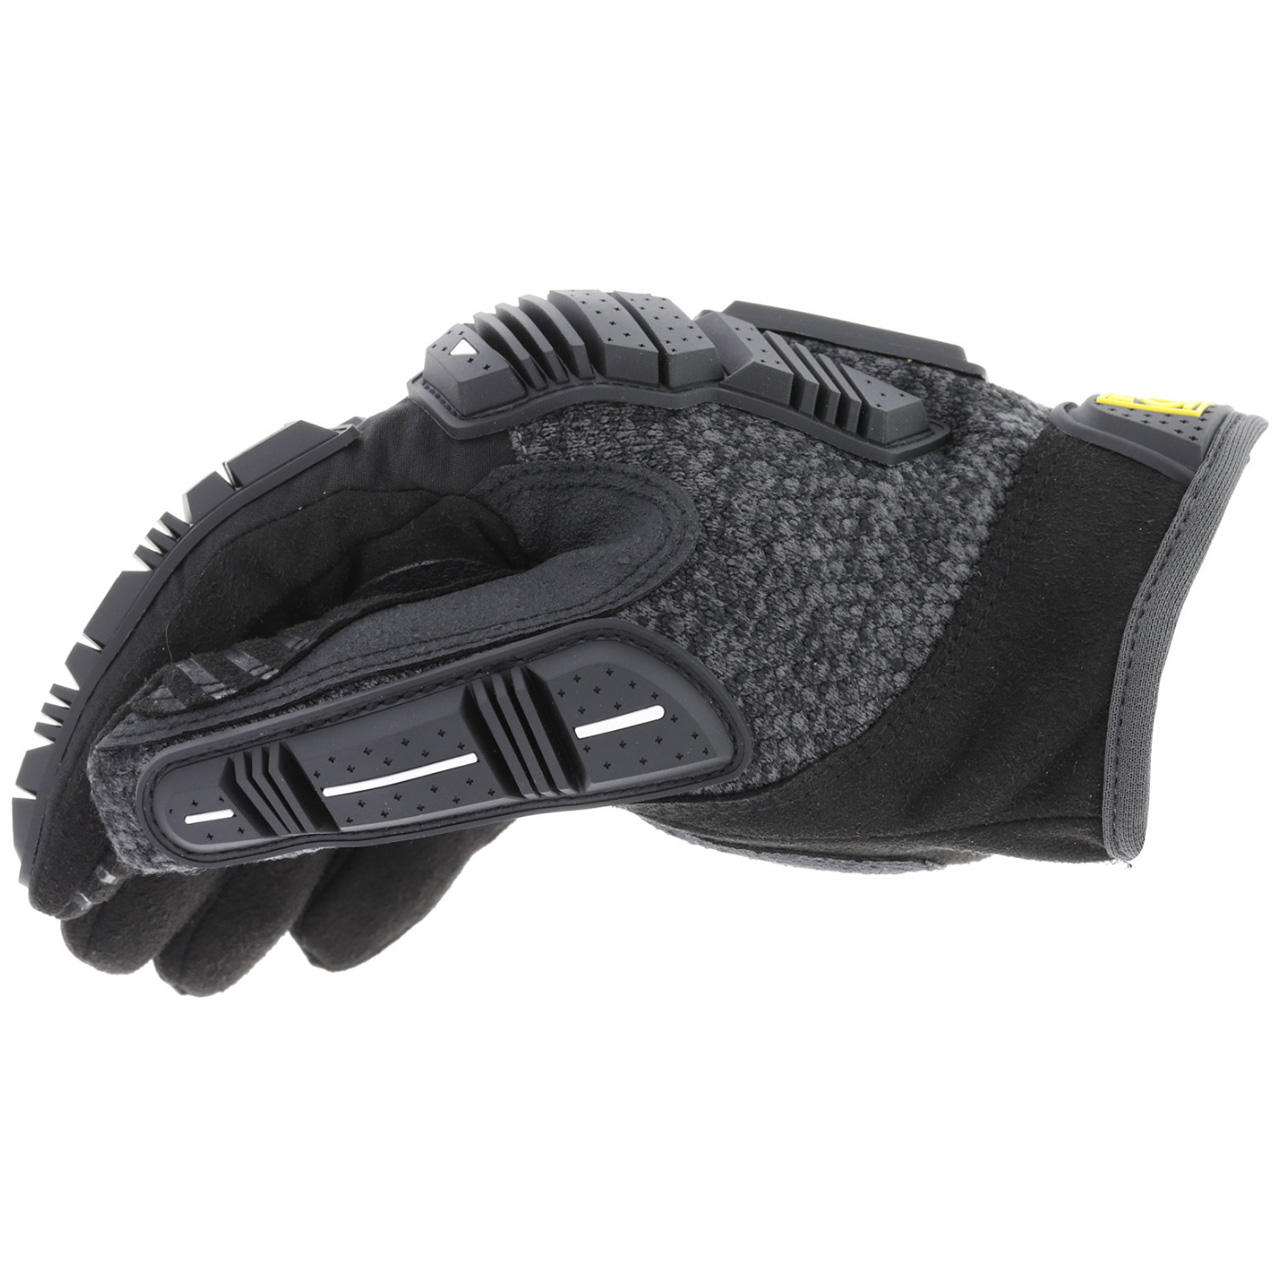 Mechanix Wear Coldwork Insulated Water Resistant Leather Work